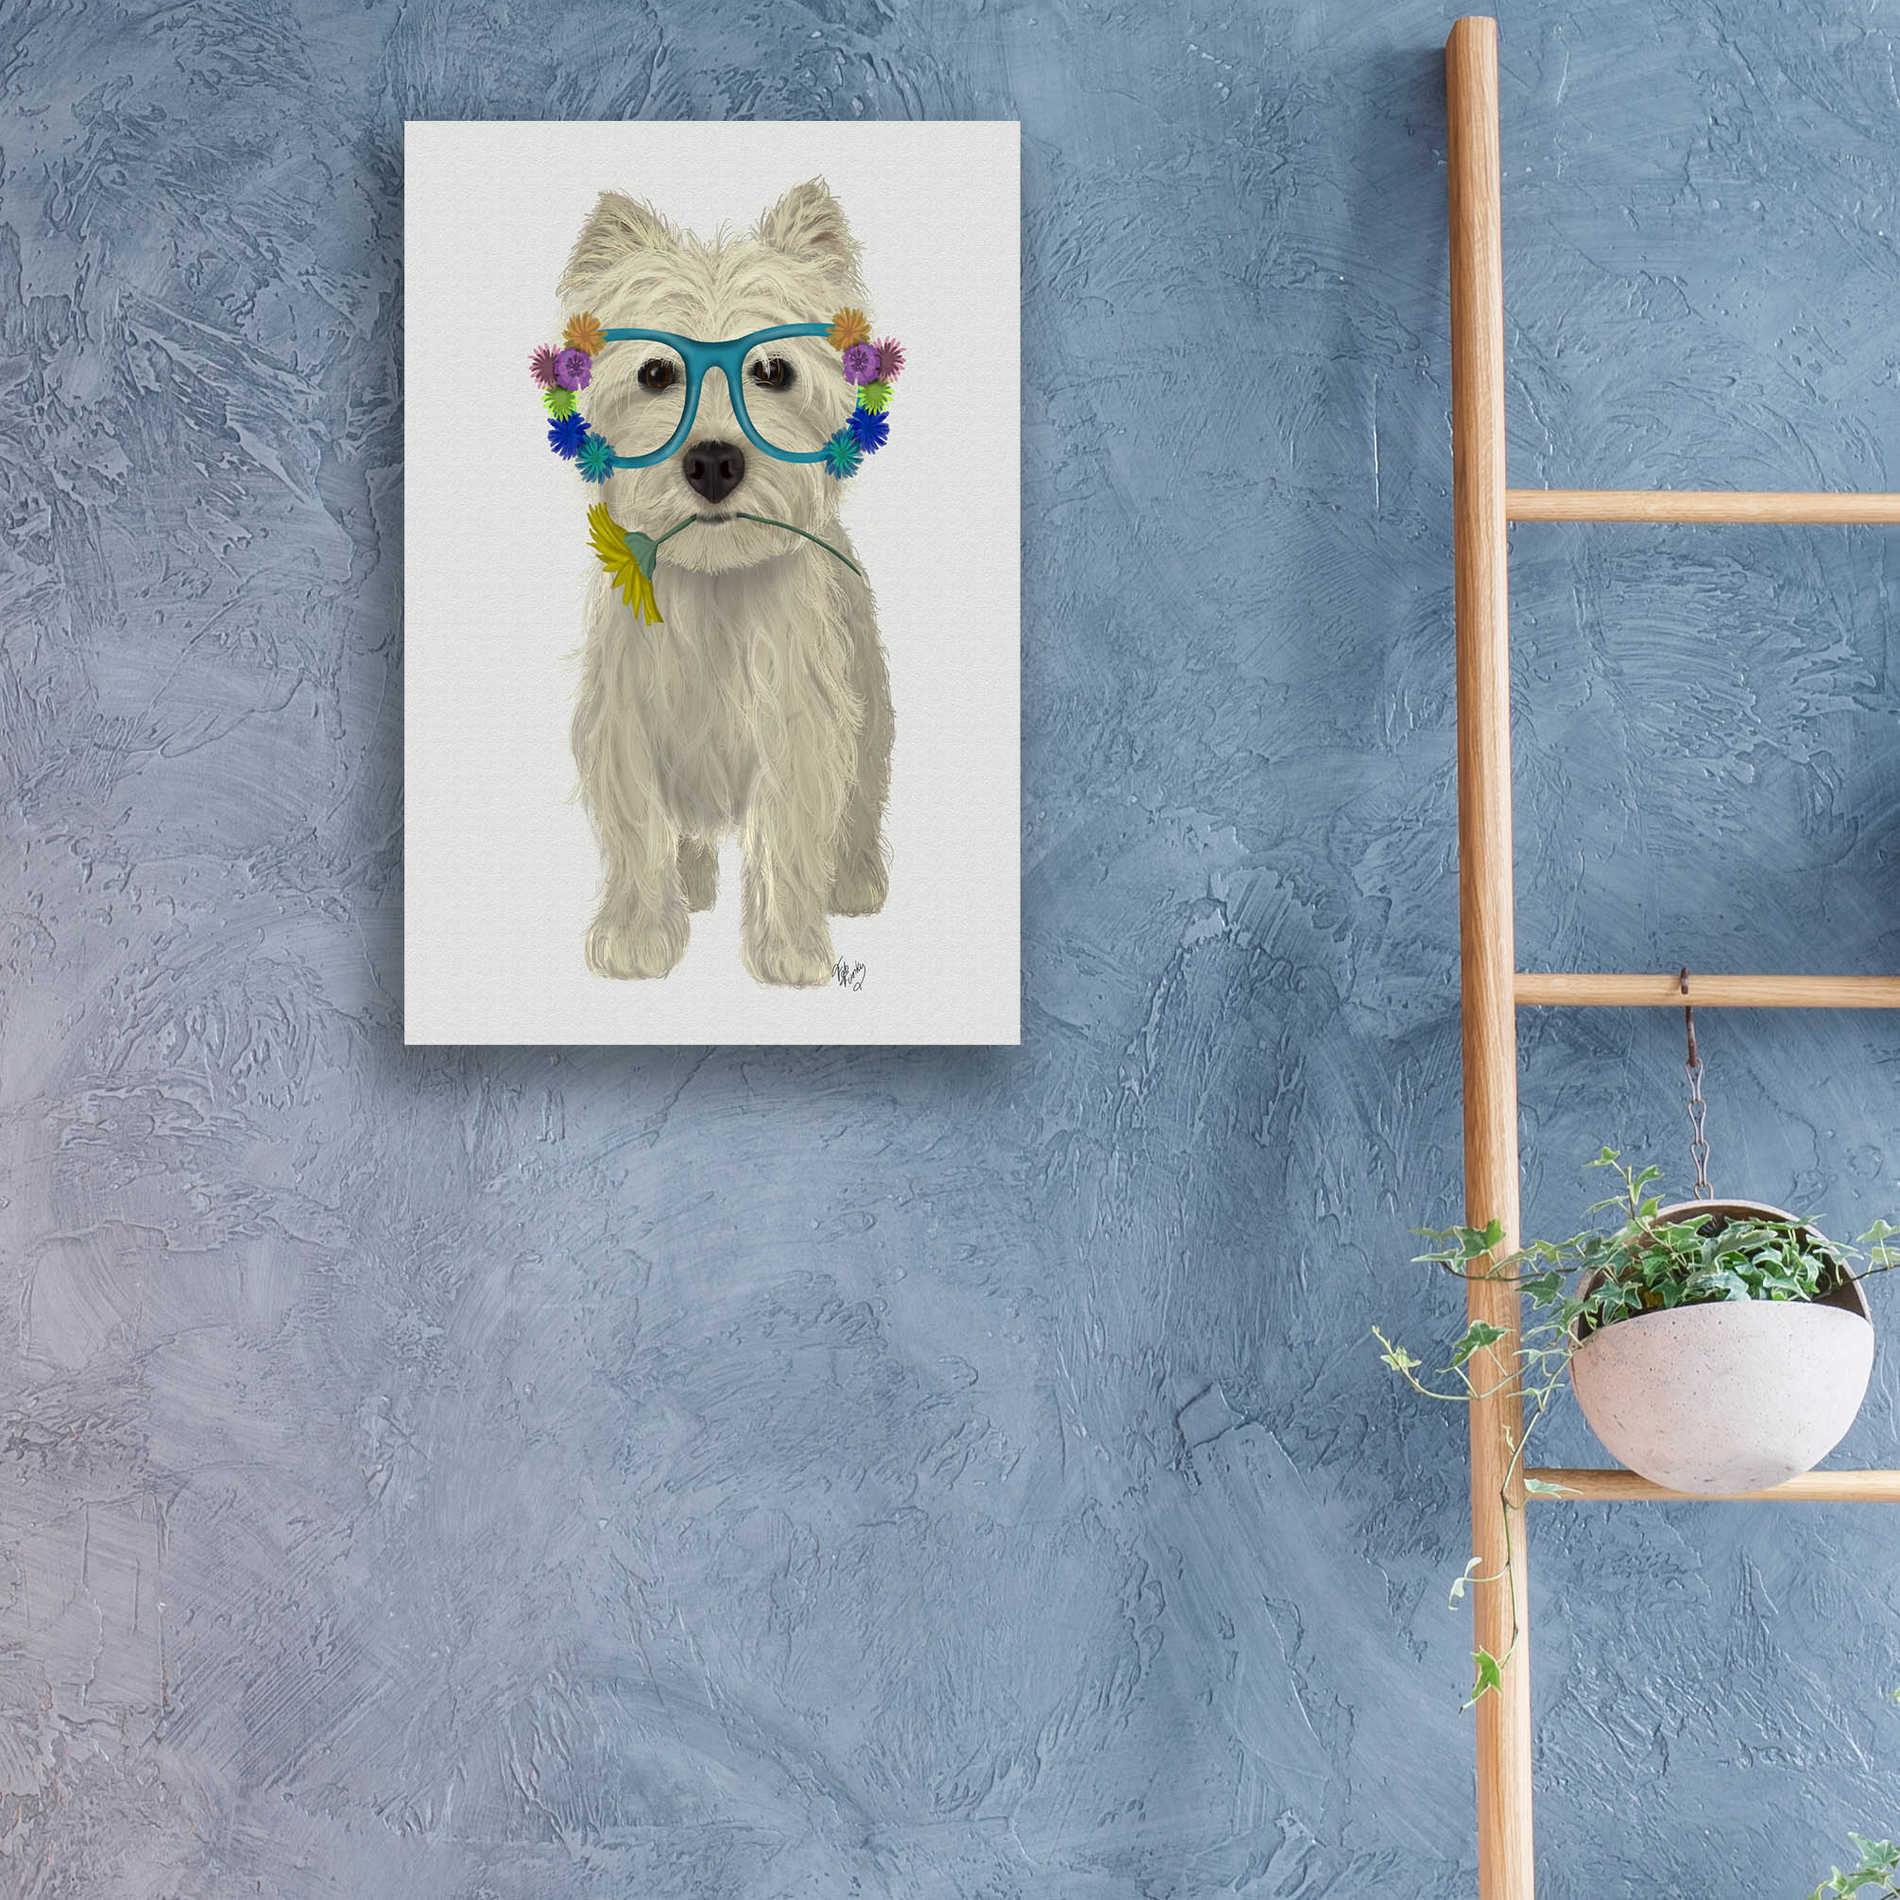 Epic Art 'West Highland Terrier Flower Glasses' by Fab Funky, Acrylic Glass Wall Art,16x24